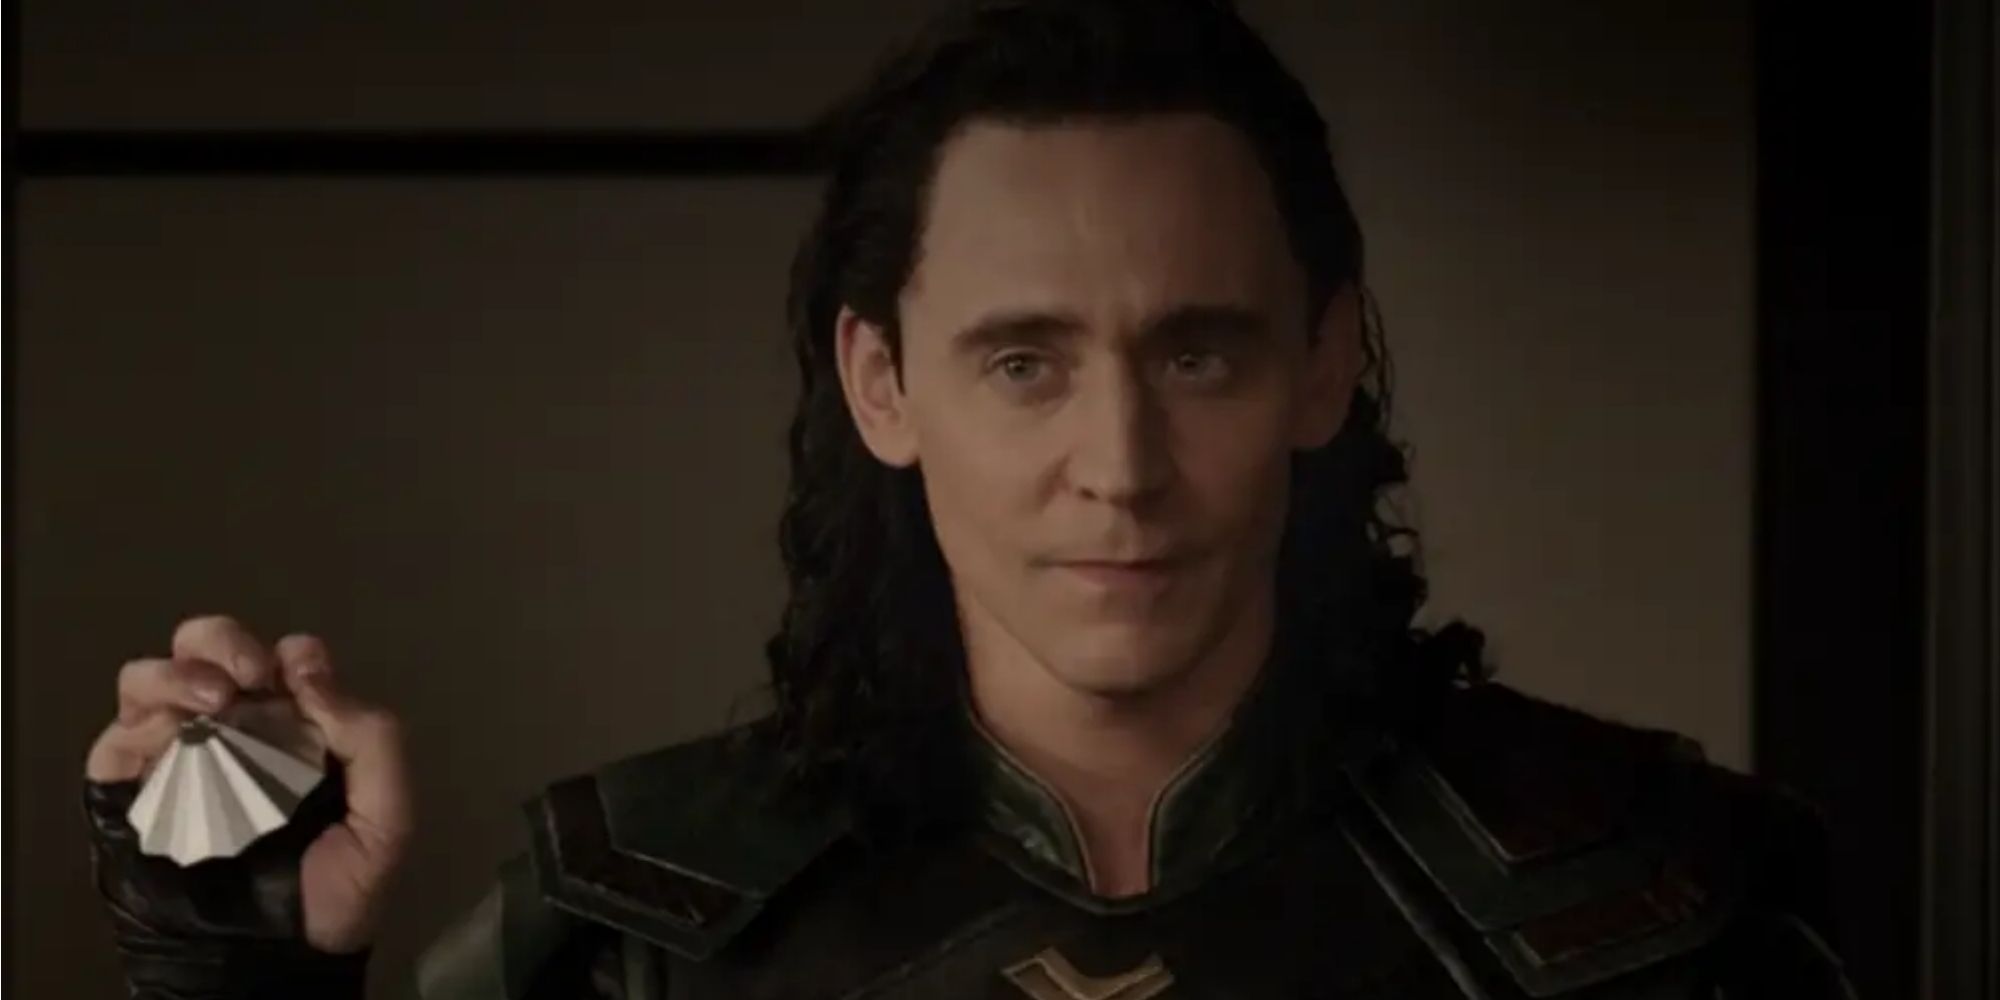 Loki makes peace with Thor at the end of Thor: Ragnarok